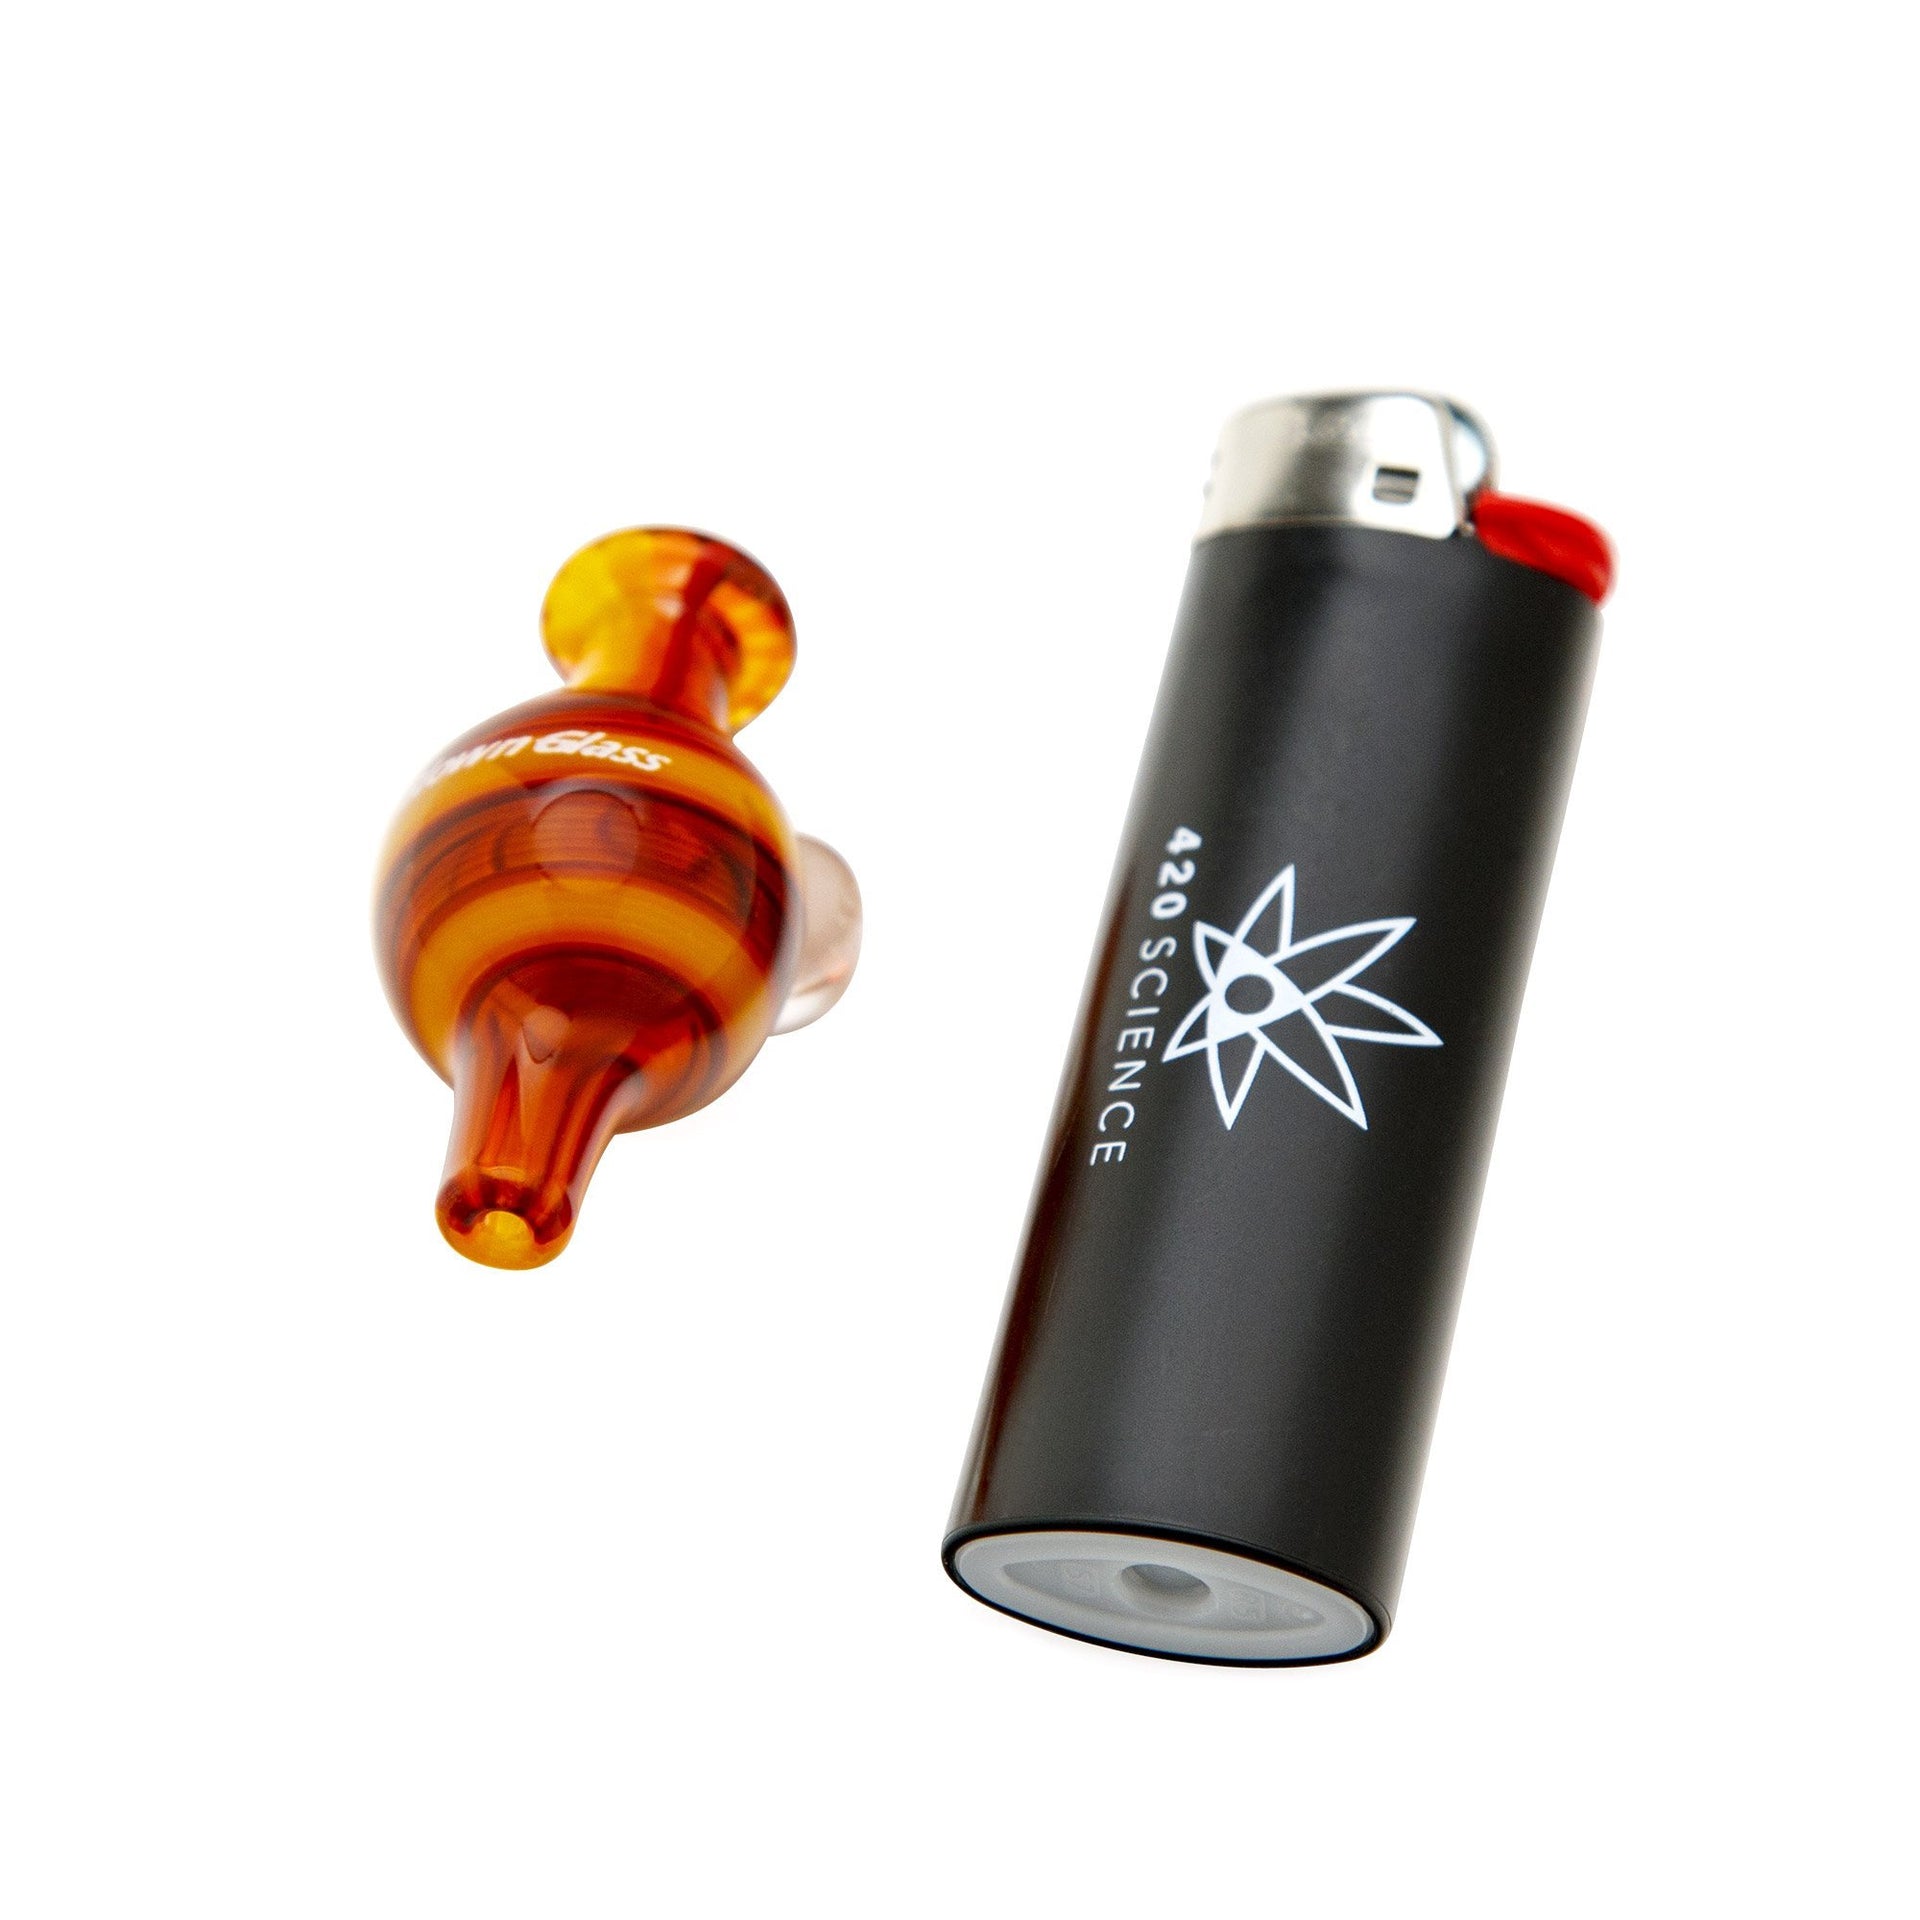 Home Blown Glass Bubble Carb Cap - Fire Swirl - 420 Science - The most trusted online smoke shop.